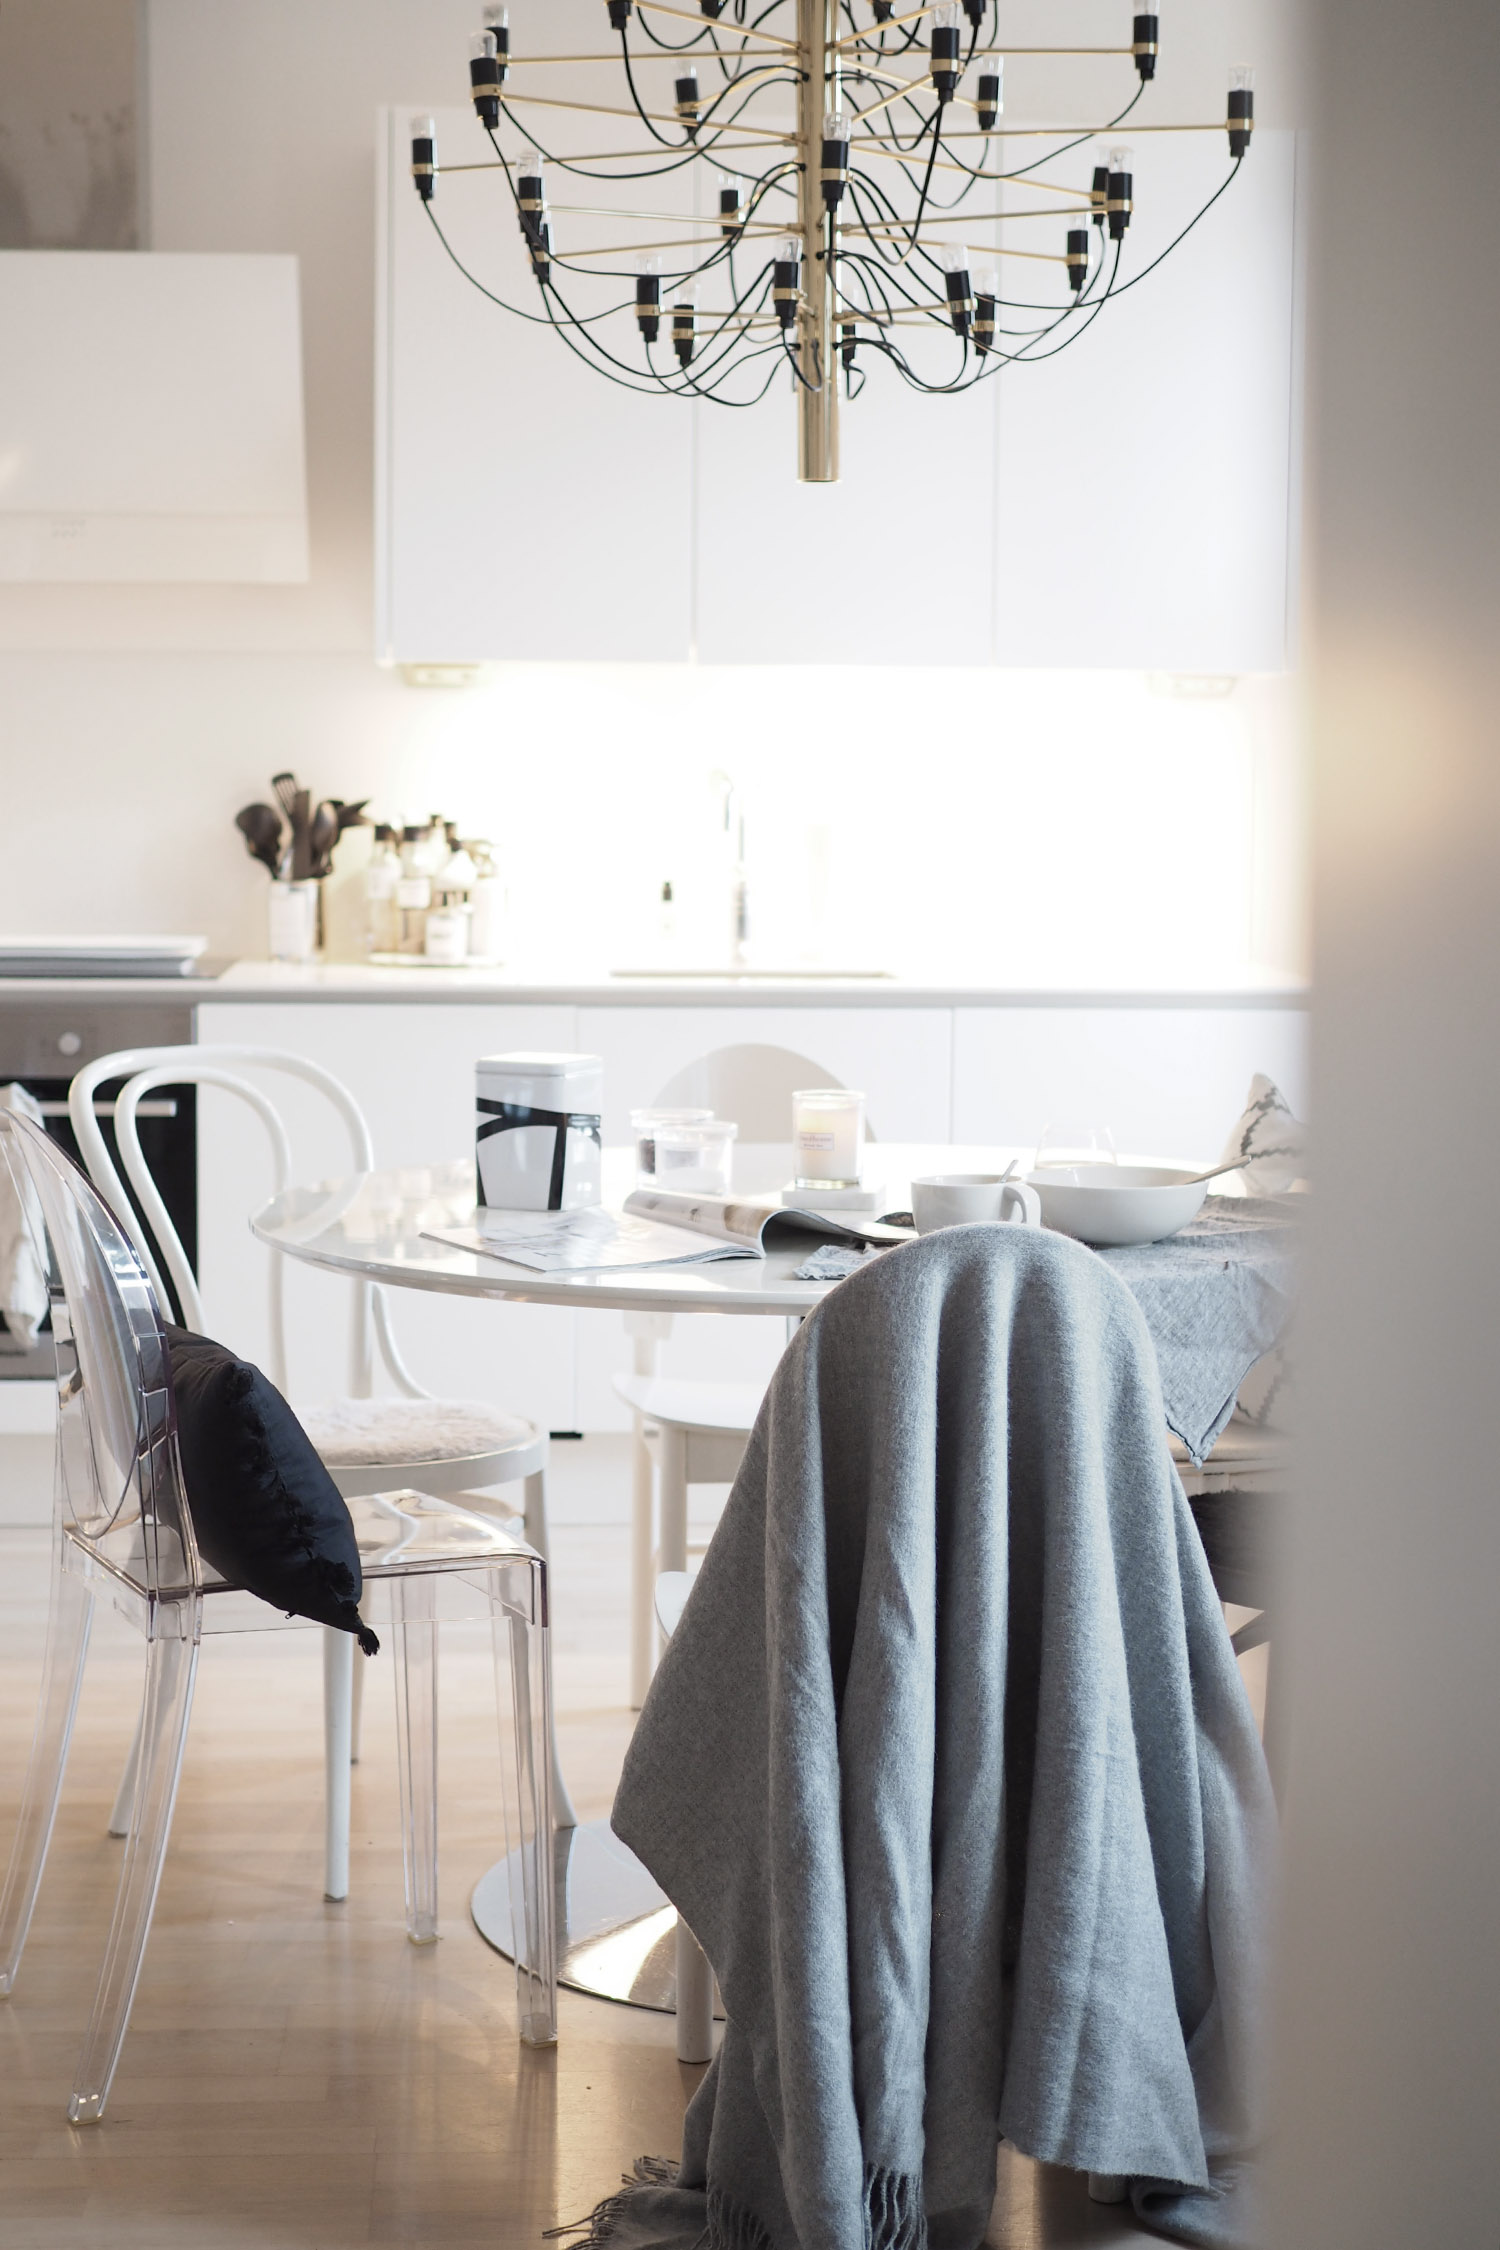 C and the city - Dining table and kitchen ready for breakfast - see more pics on the blog: //www.idealista.fi/charandthecity/2016/11/21/ruokailutilan-talvikuteet #candthecity #interior #kitchen #tablesetting #breakfast #balmuir #flos